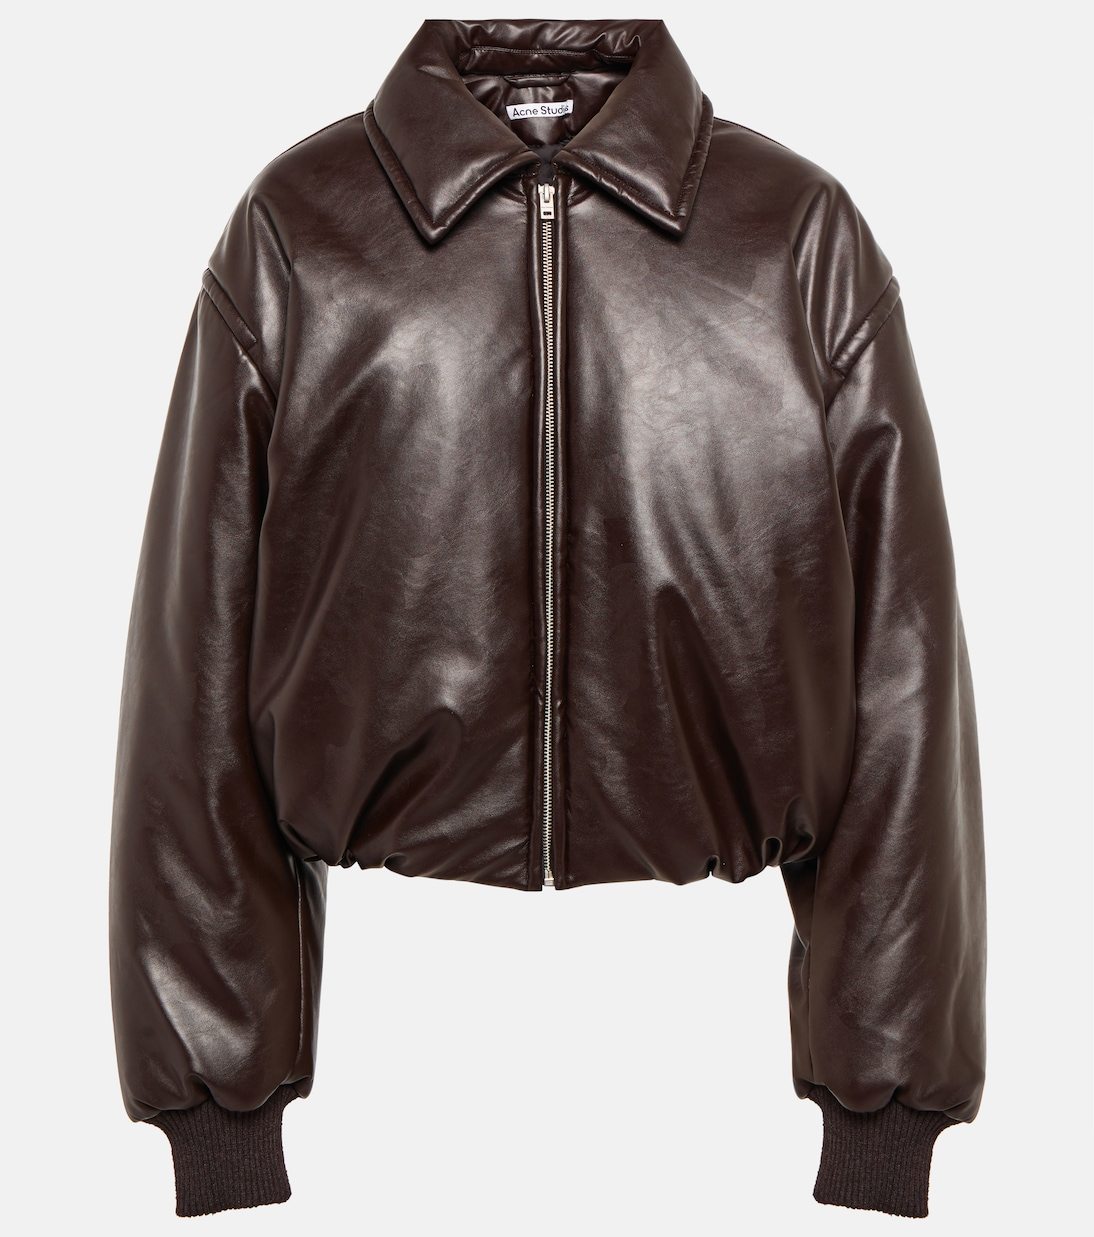 A brown leather jacket with a zipper Description automatically generated